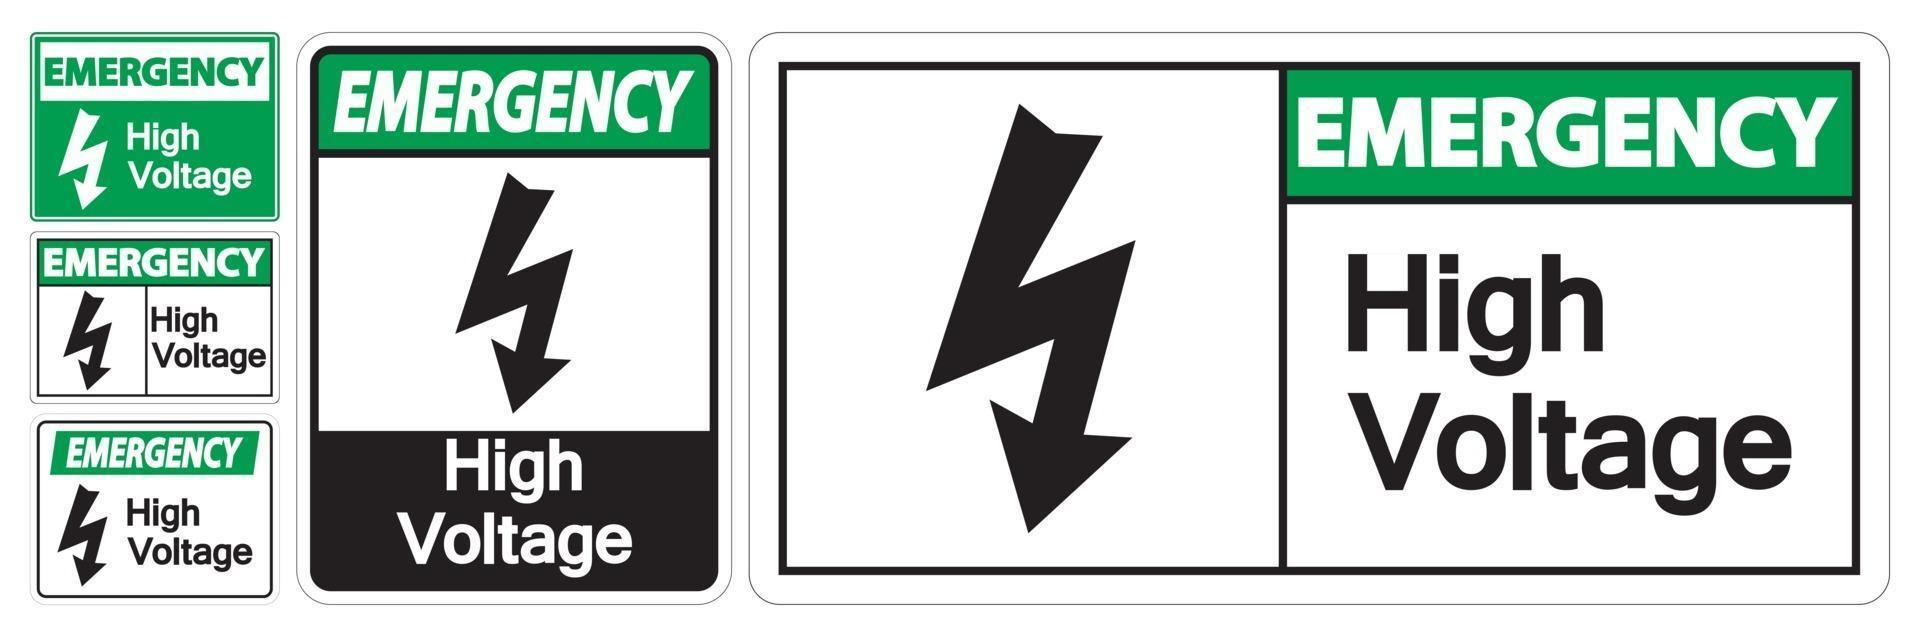 Emergency High voltage Sign Isolate On White Background,Vector Illustration EPS.10 vector